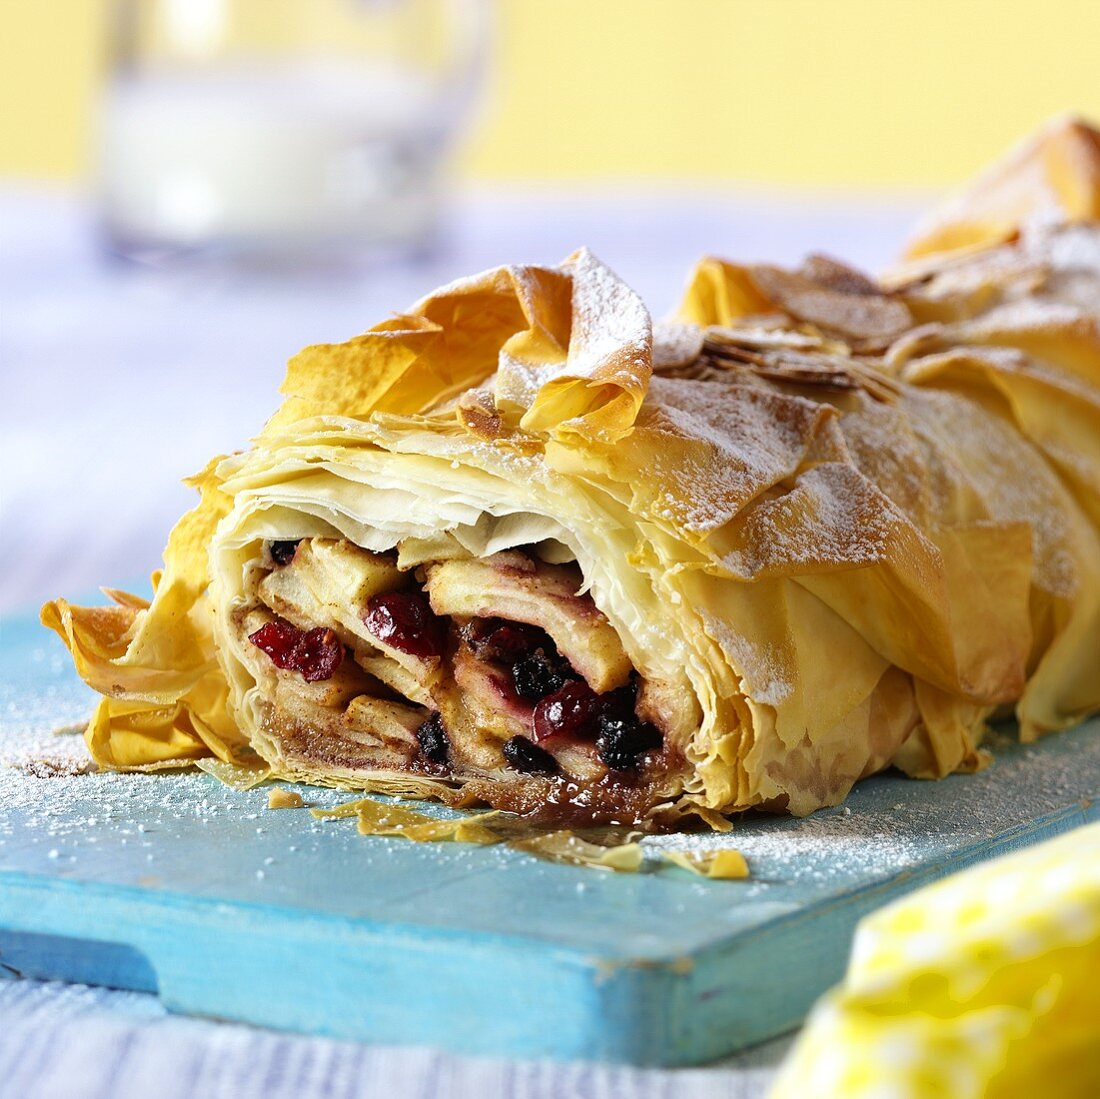 Sweet strudel with fruity filling, a piece cut